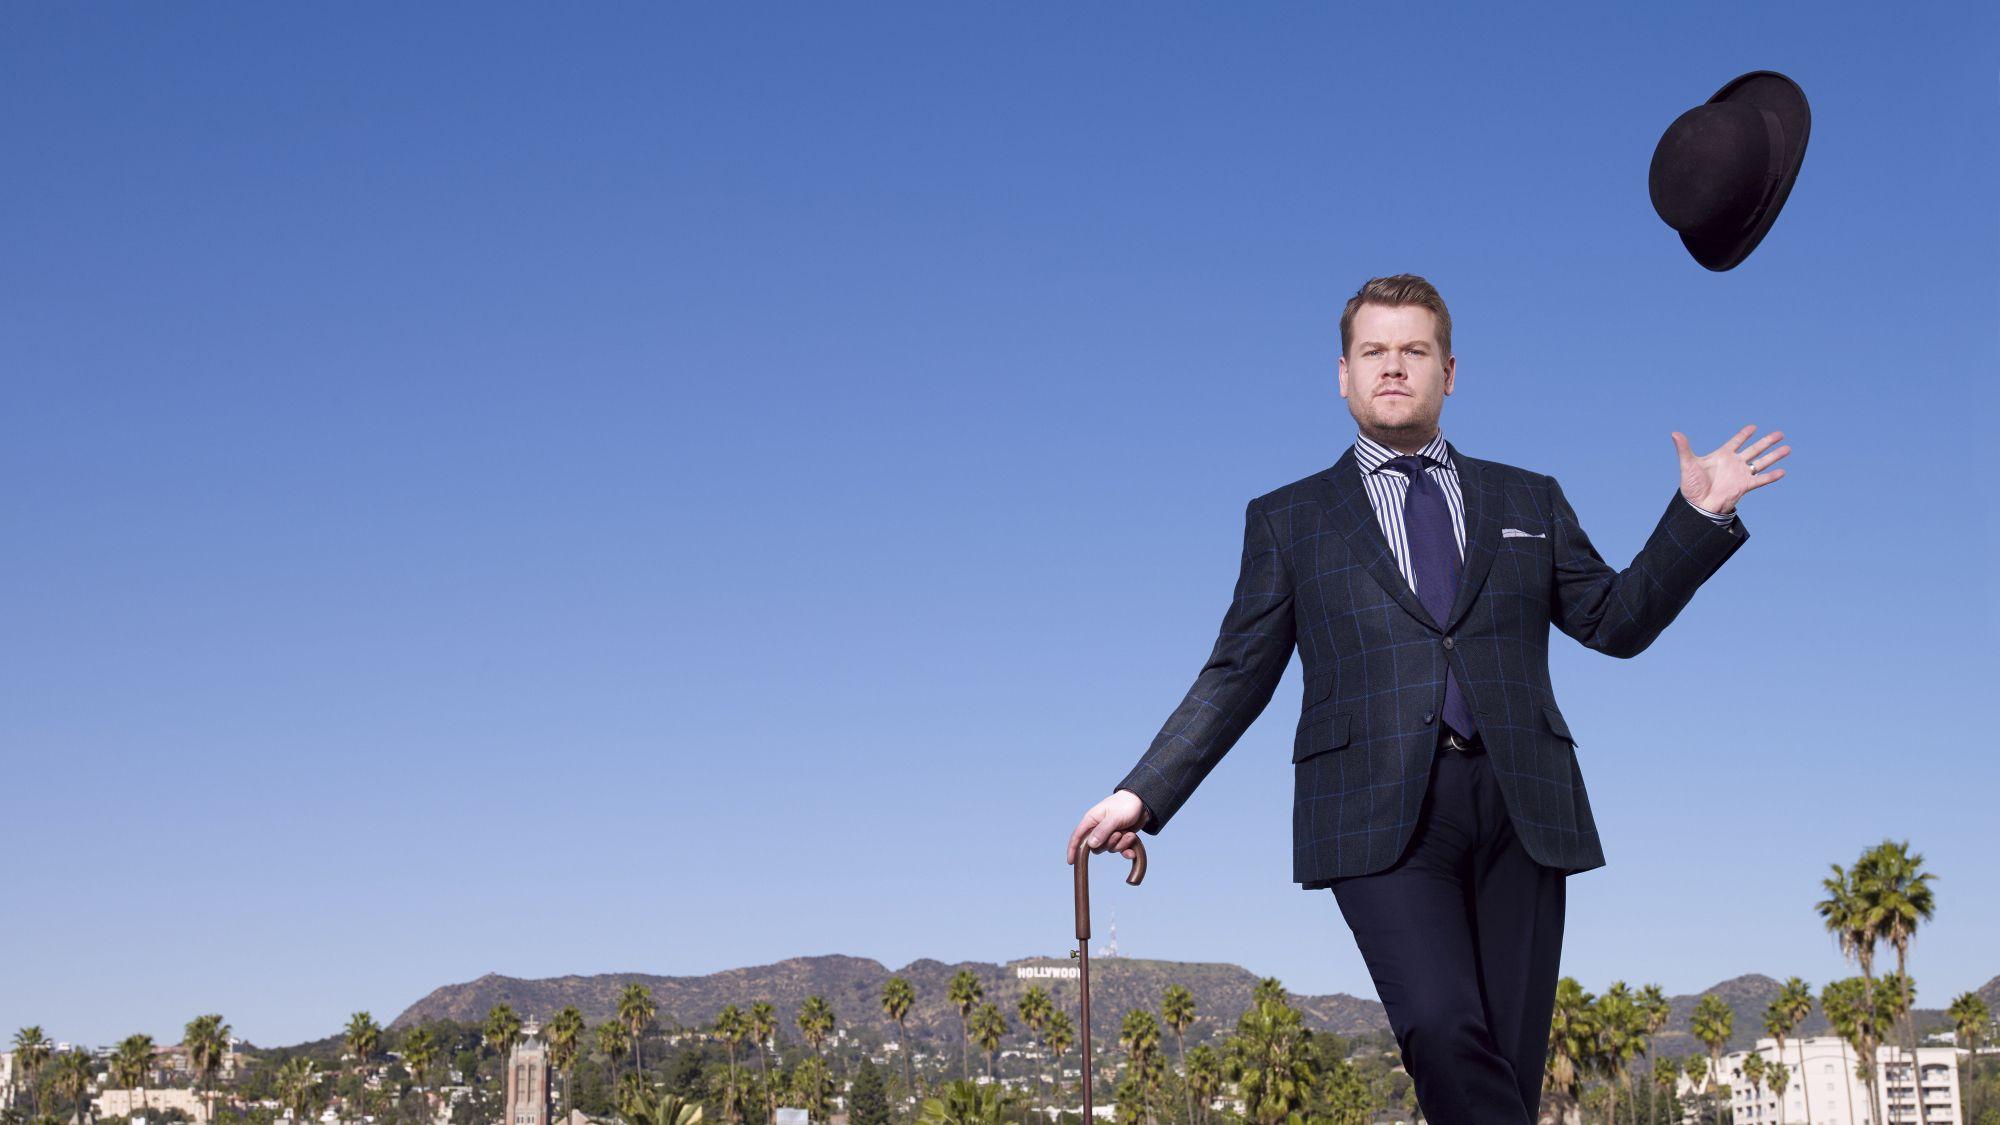 James Corden Wallpaper Image Photo Picture Background